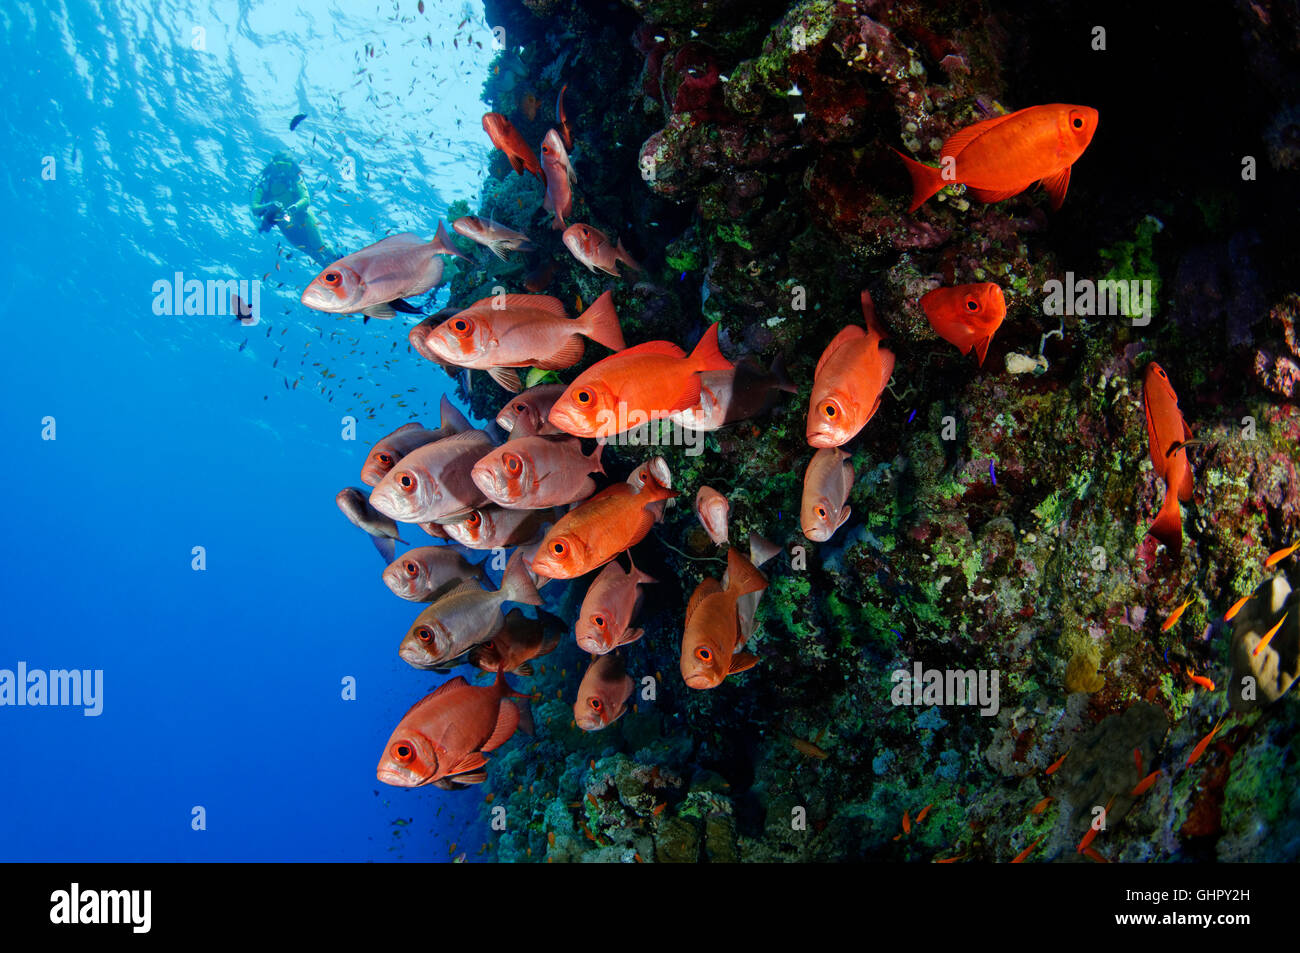 Priacanthus hamrur, School of Moontail bullseye and scuba diver, St. Johns Reef, Red Sea, Egypt, Africa Stock Photo